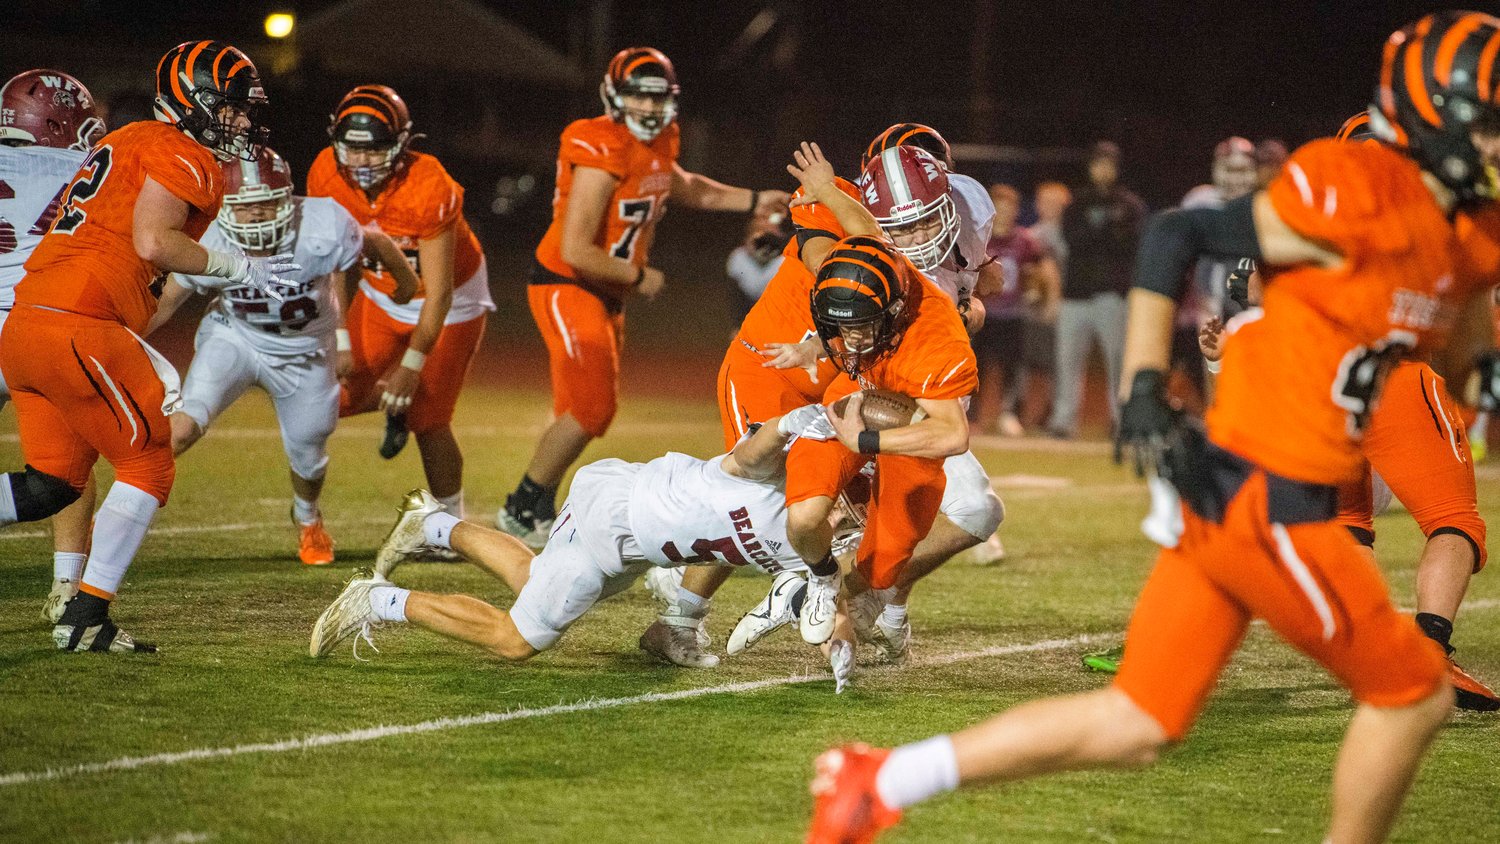 Centralia sophomore Kellen Rooklidge (22) busts through the Bearcat defense before being brought down under Friday night lights.